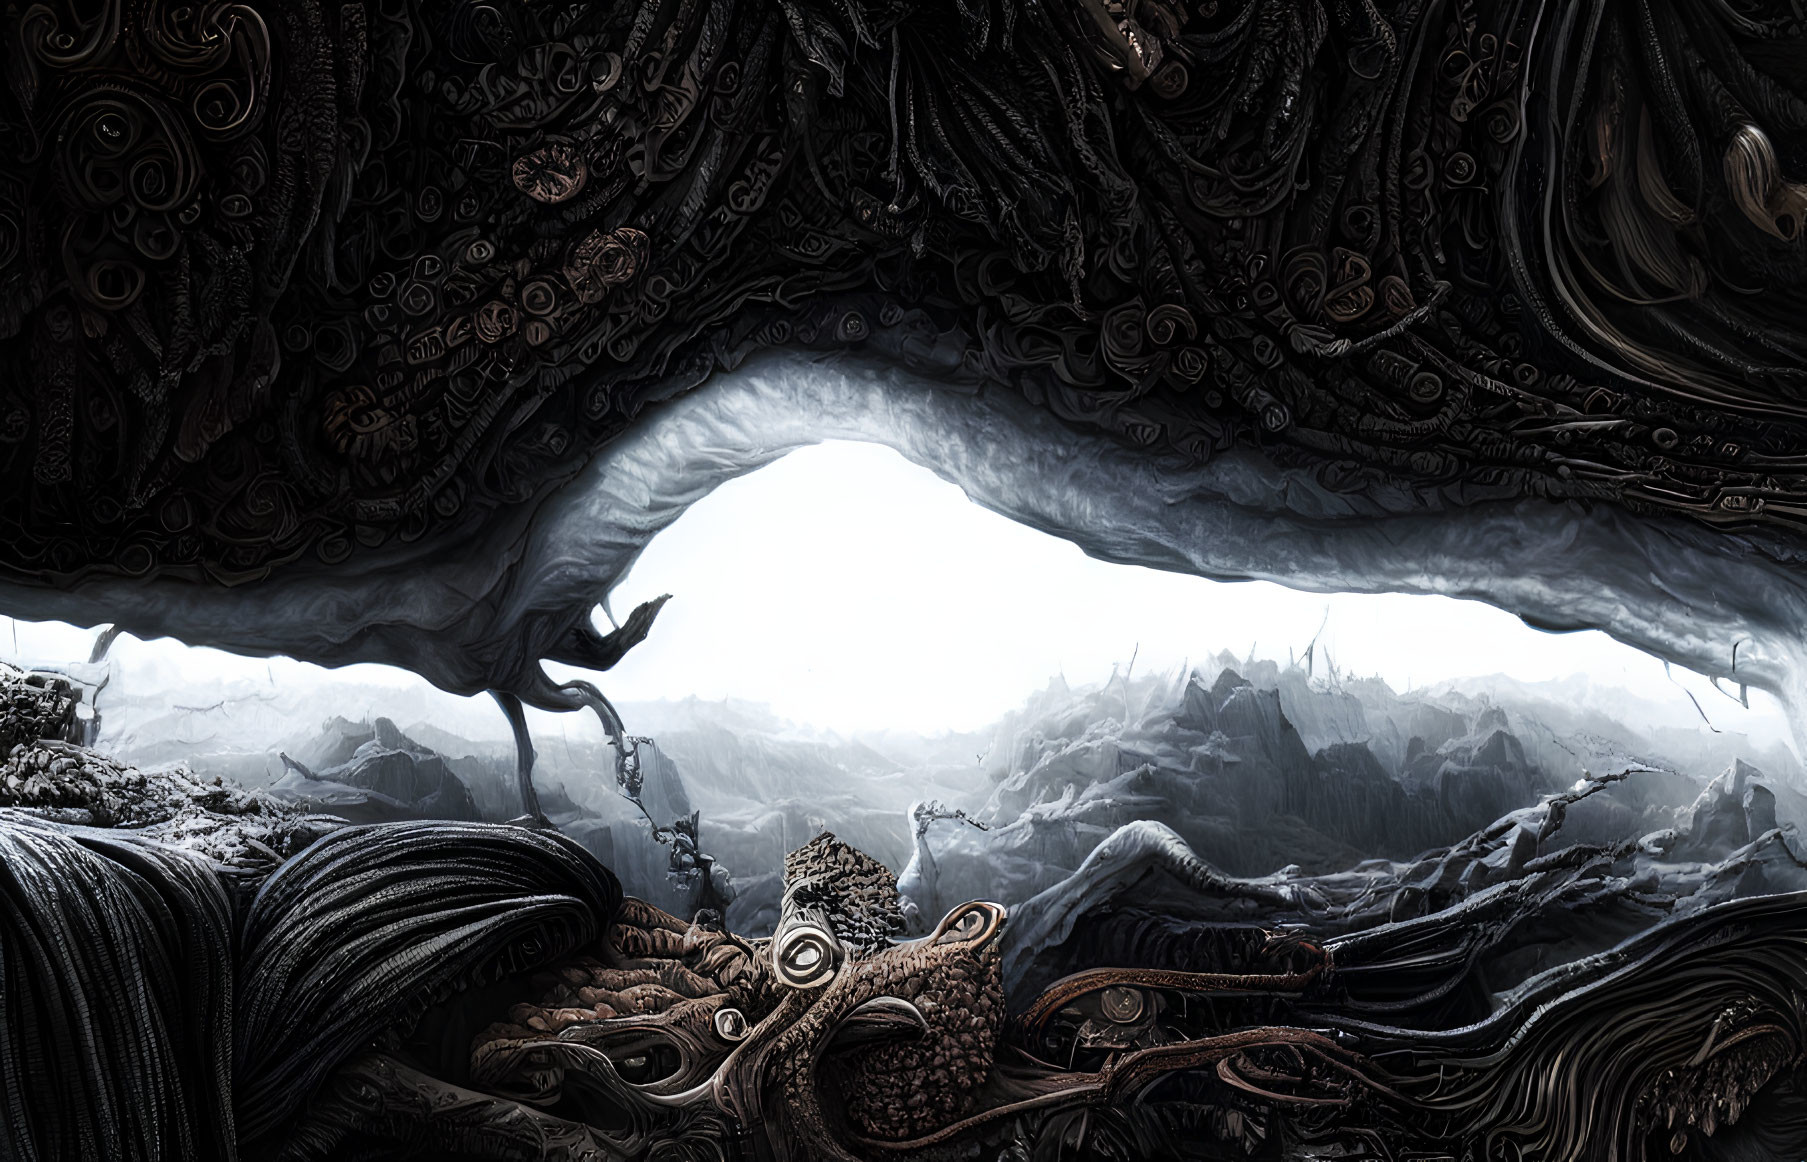 Dark Cave with Alien-like Textures and Solitary Figure gazing at Bright Exit